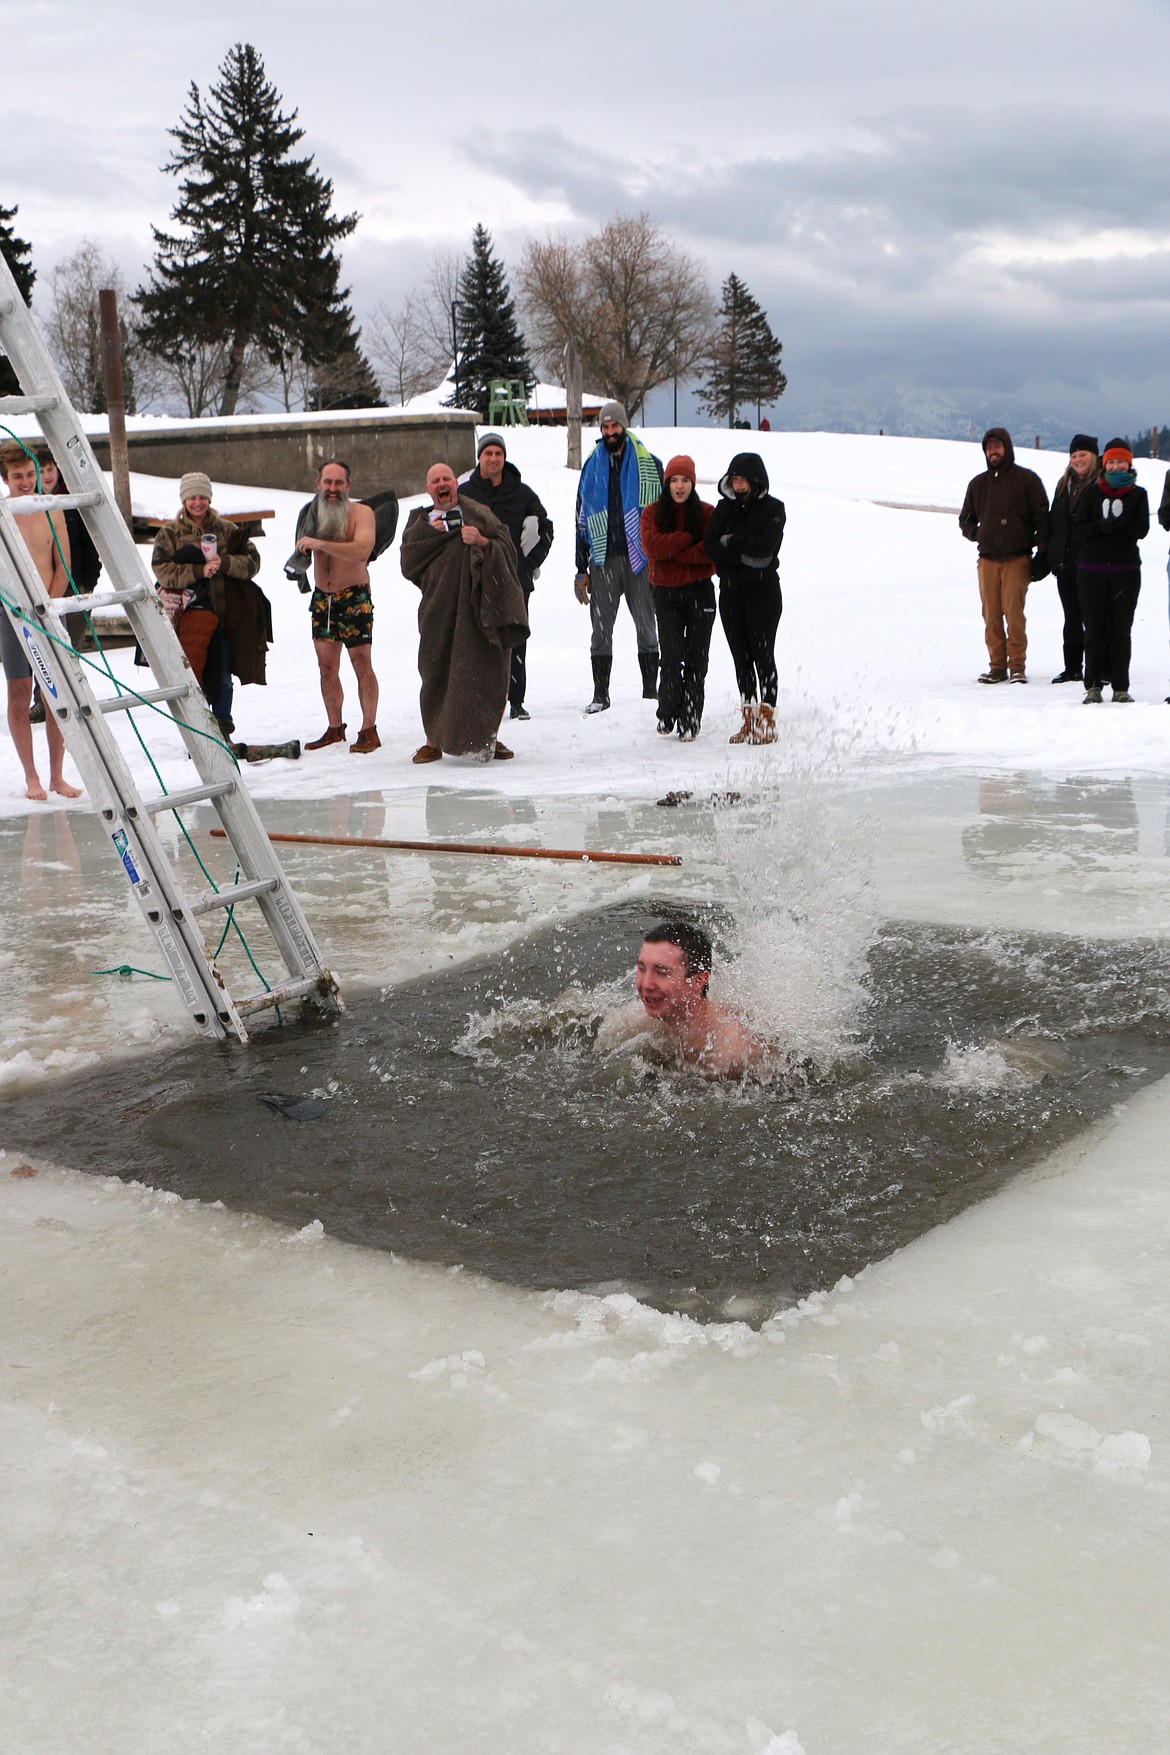 Jacob Slocome, home of Christmas leave from the U.S. Navy, jumps into Lake Pend Oreille during Boy Scout Troop 111's annual Polar Bear Plunge. Slocome was a member of the troop before entering the Navy.